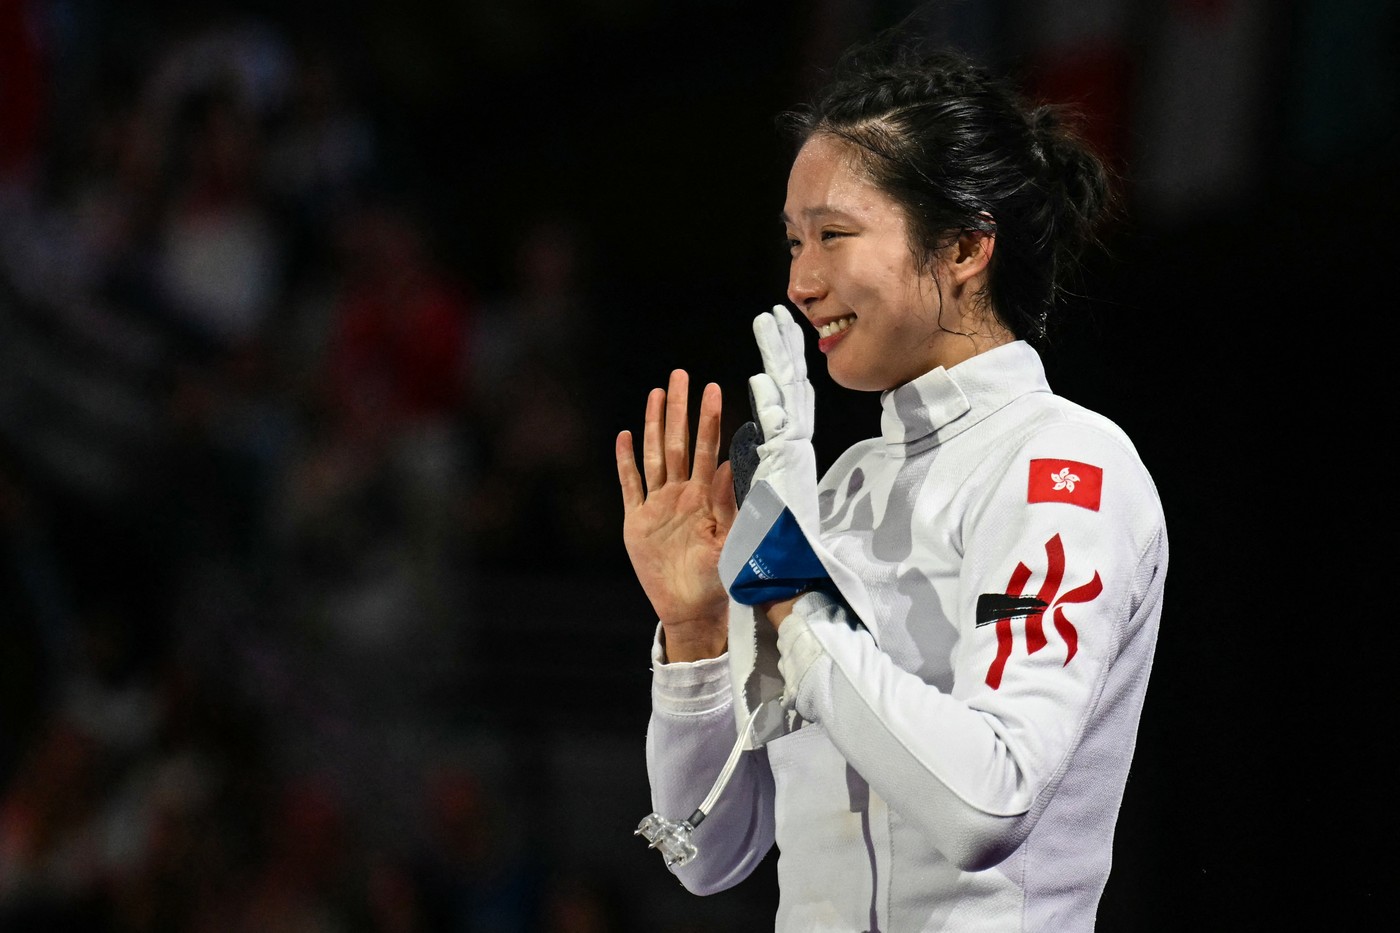 Hong Kong's Kong Man Wai Vivian celebrates after winning against France's Auriane Mallo-Breton in the women's epee individual gold medal bout during the Paris 2024 Olympic Games at the Grand Palais in Paris, on July 27, 2024.,Image: 893109054, License: Rights-managed, Restrictions: , Model Release: no